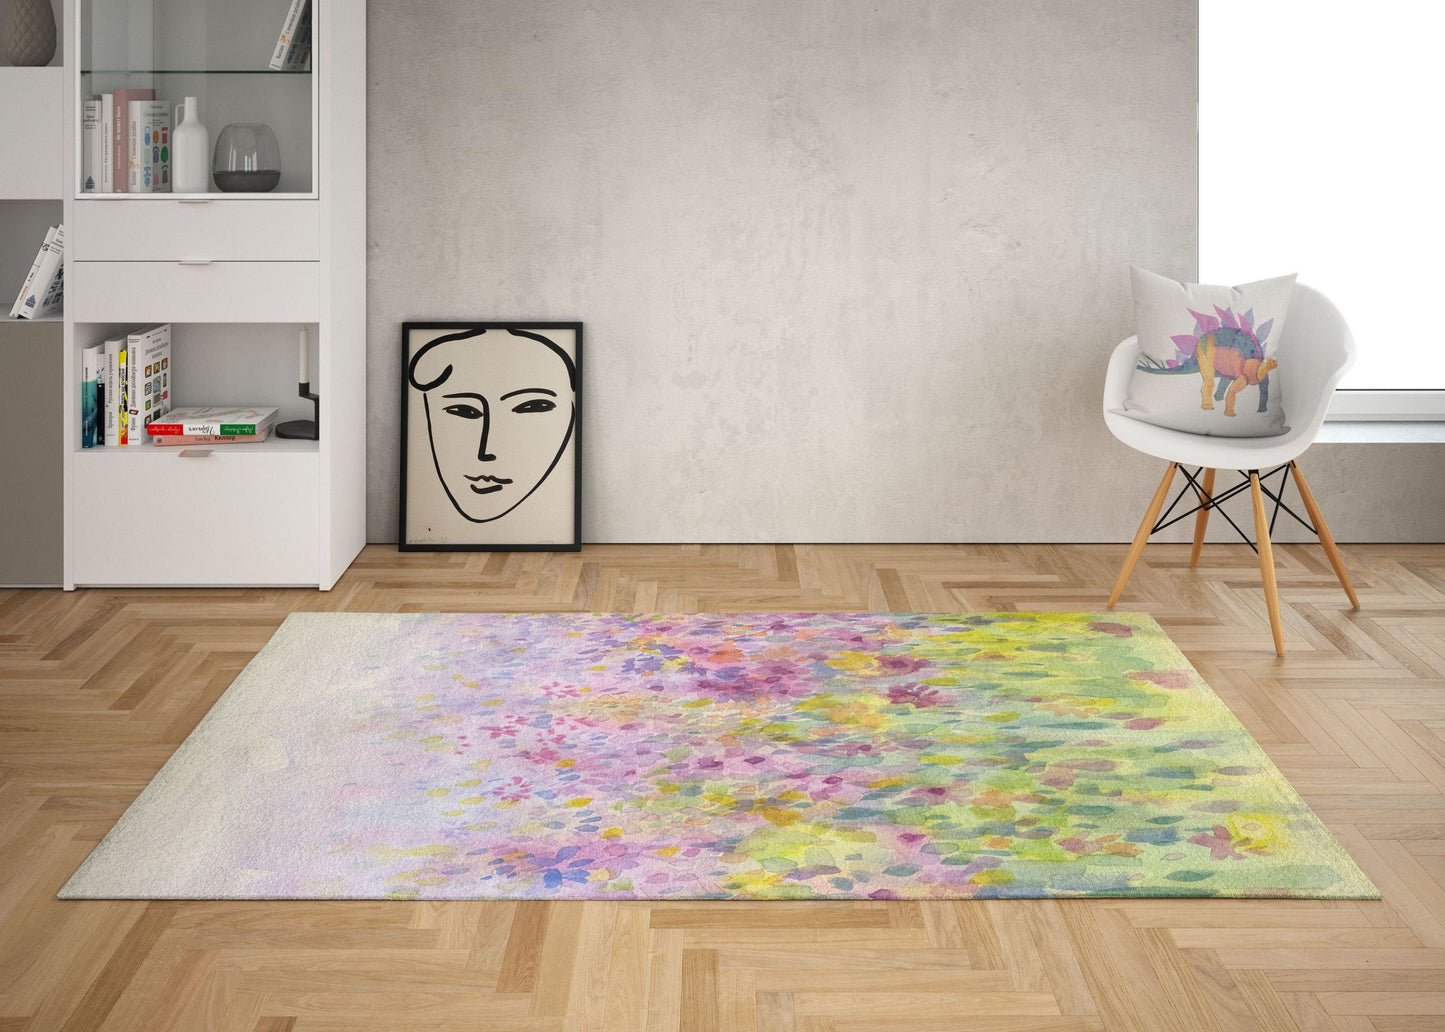 Rugs And Carpet, Large Area Rugs, Thick Carpet, Rectangle Rug, Rainbow Area Rug, Floral Rug, Modern Area Rug, Housewarming Gift, Made In USA